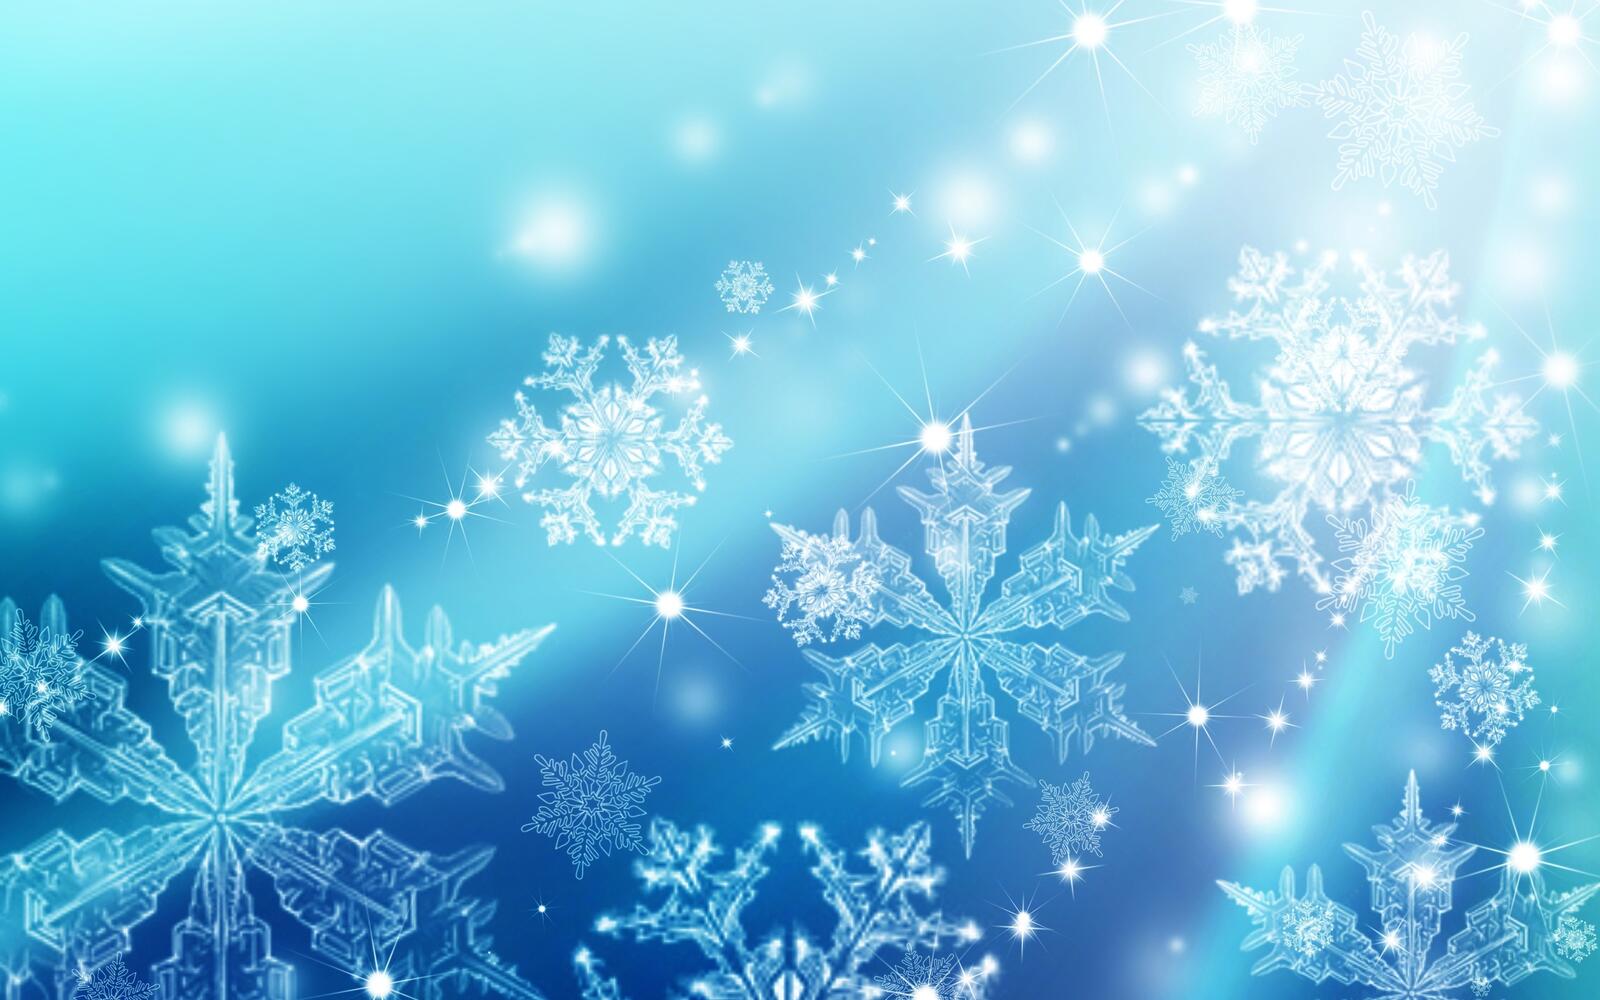 Wallpapers snowflakes frost blue background on the desktop